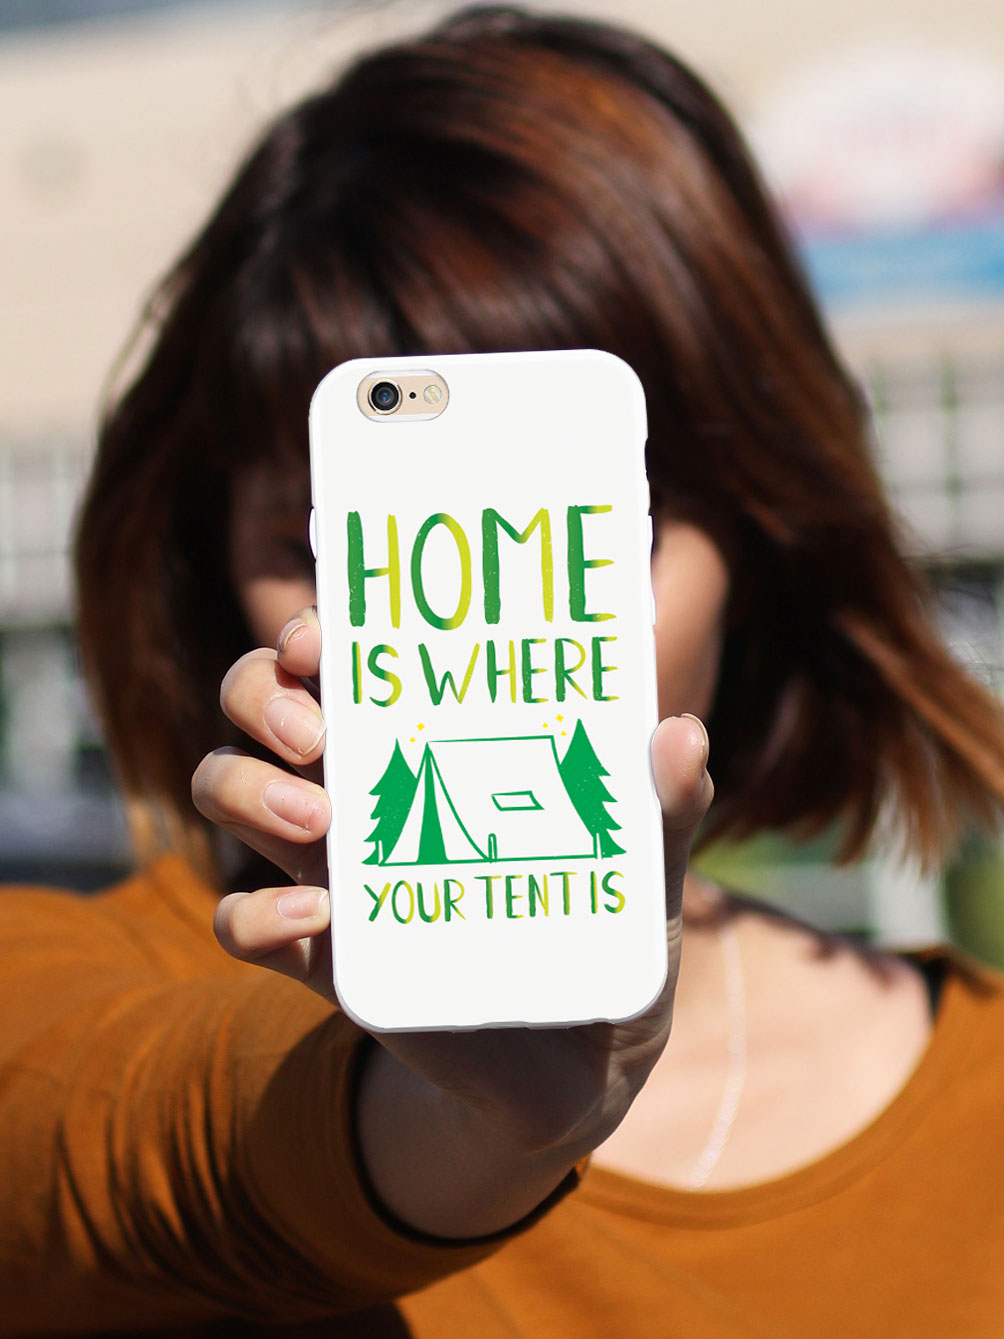 Home Is Where Your Tent Is - White Case